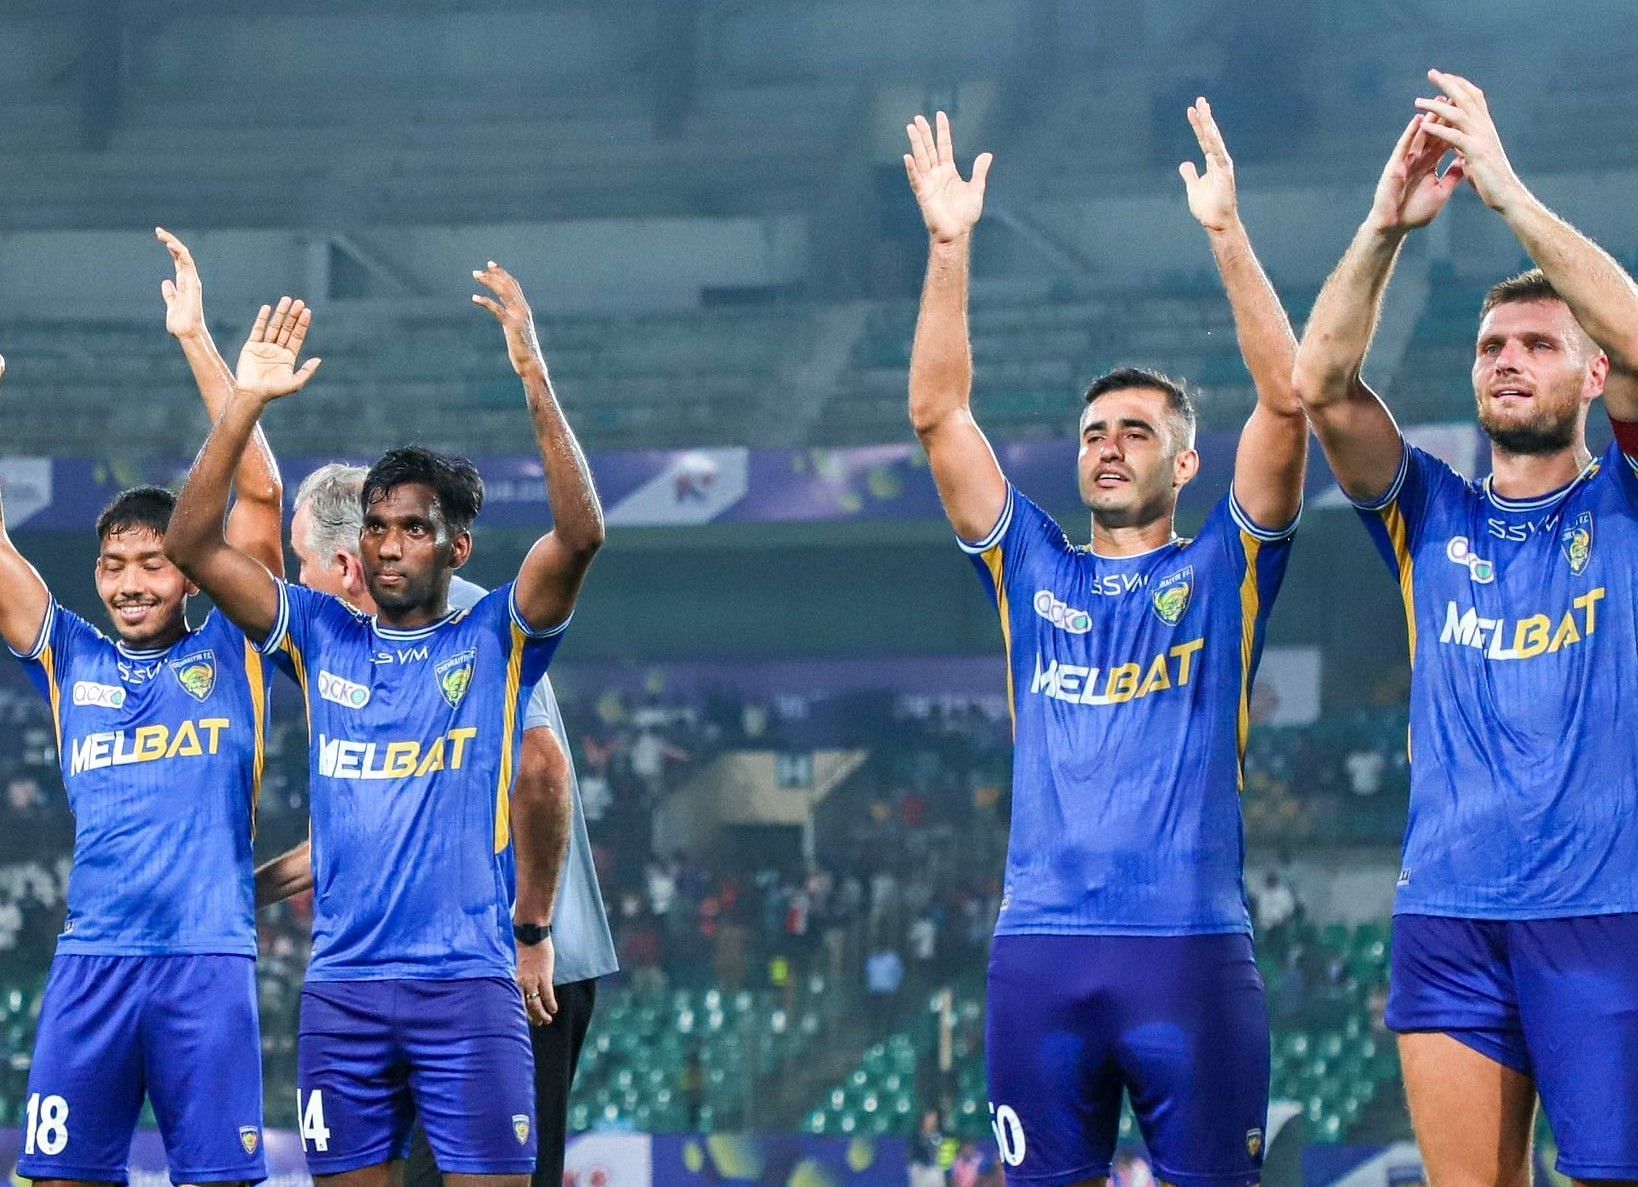 Chennaiyin FC will be hoping to extend their winning run away from home.